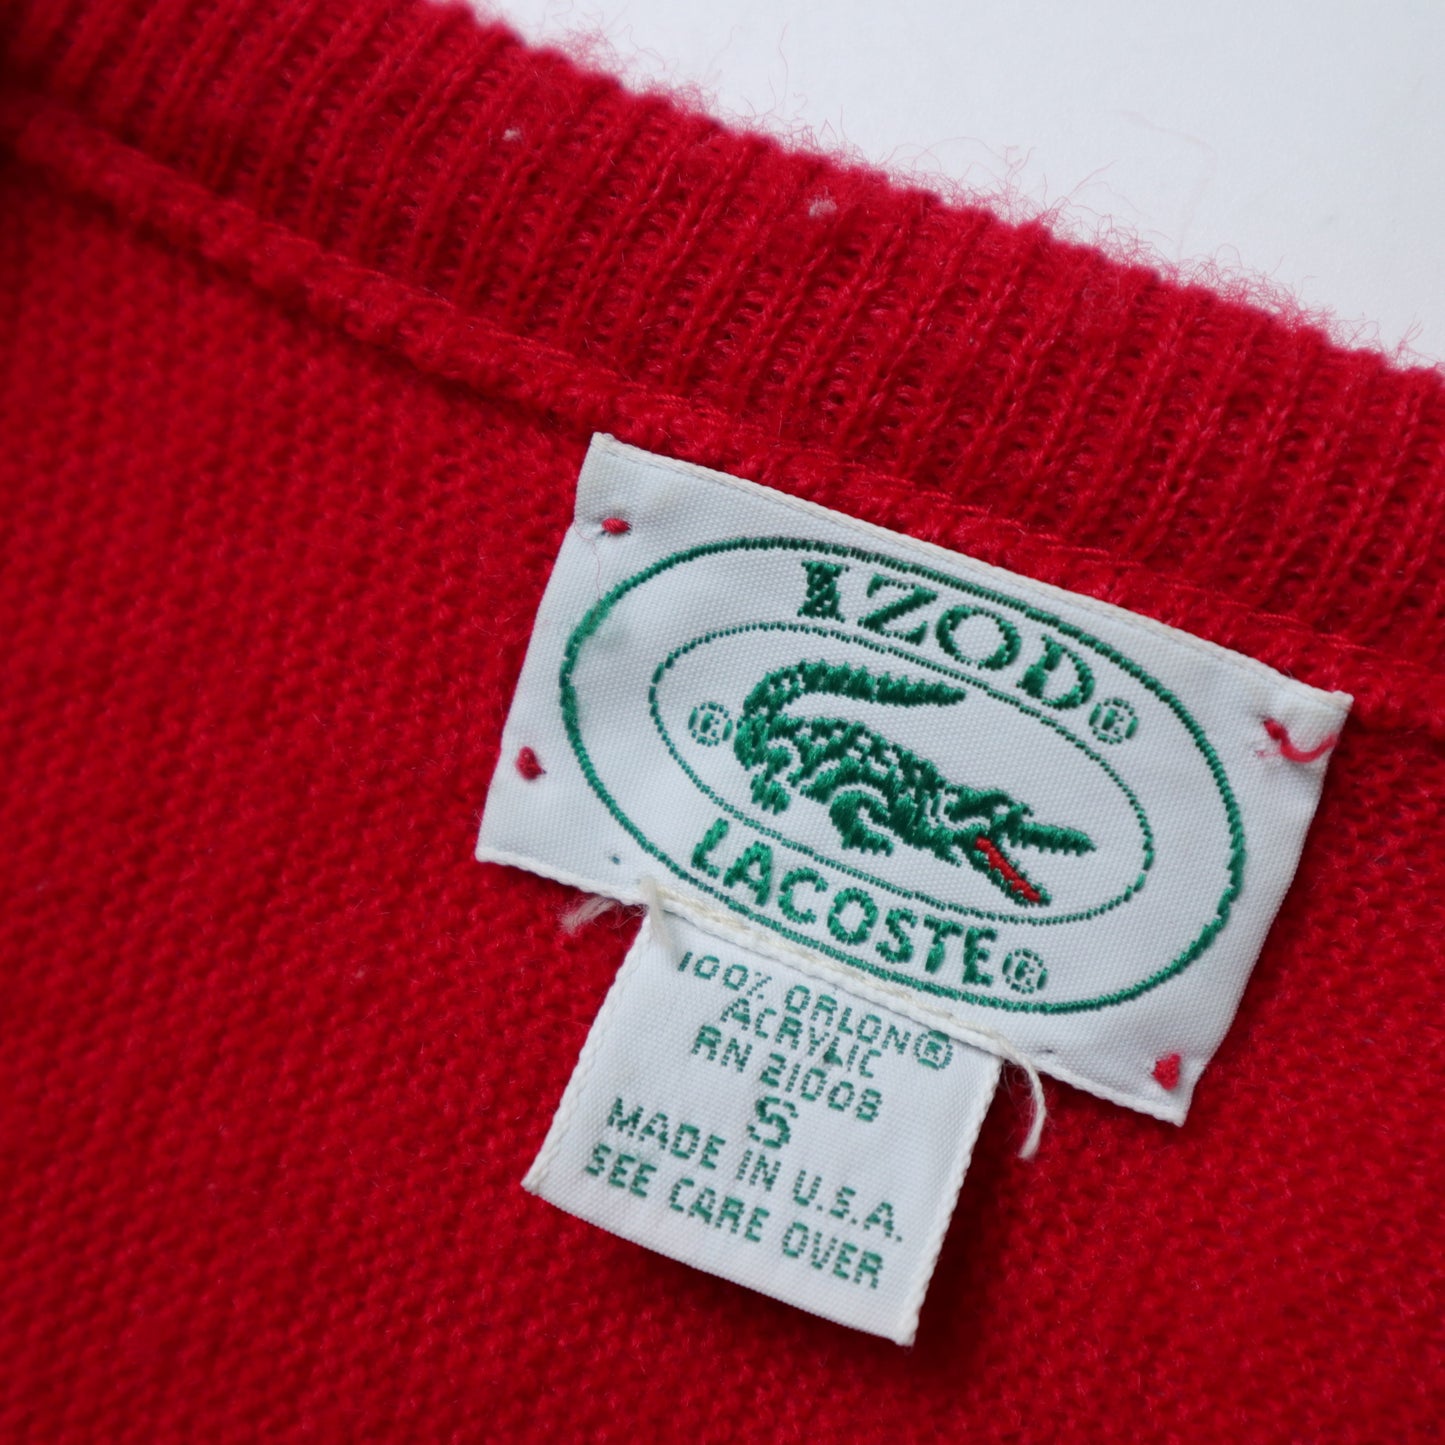 1980s Lacoste IZOD American-made red V-neck sweater